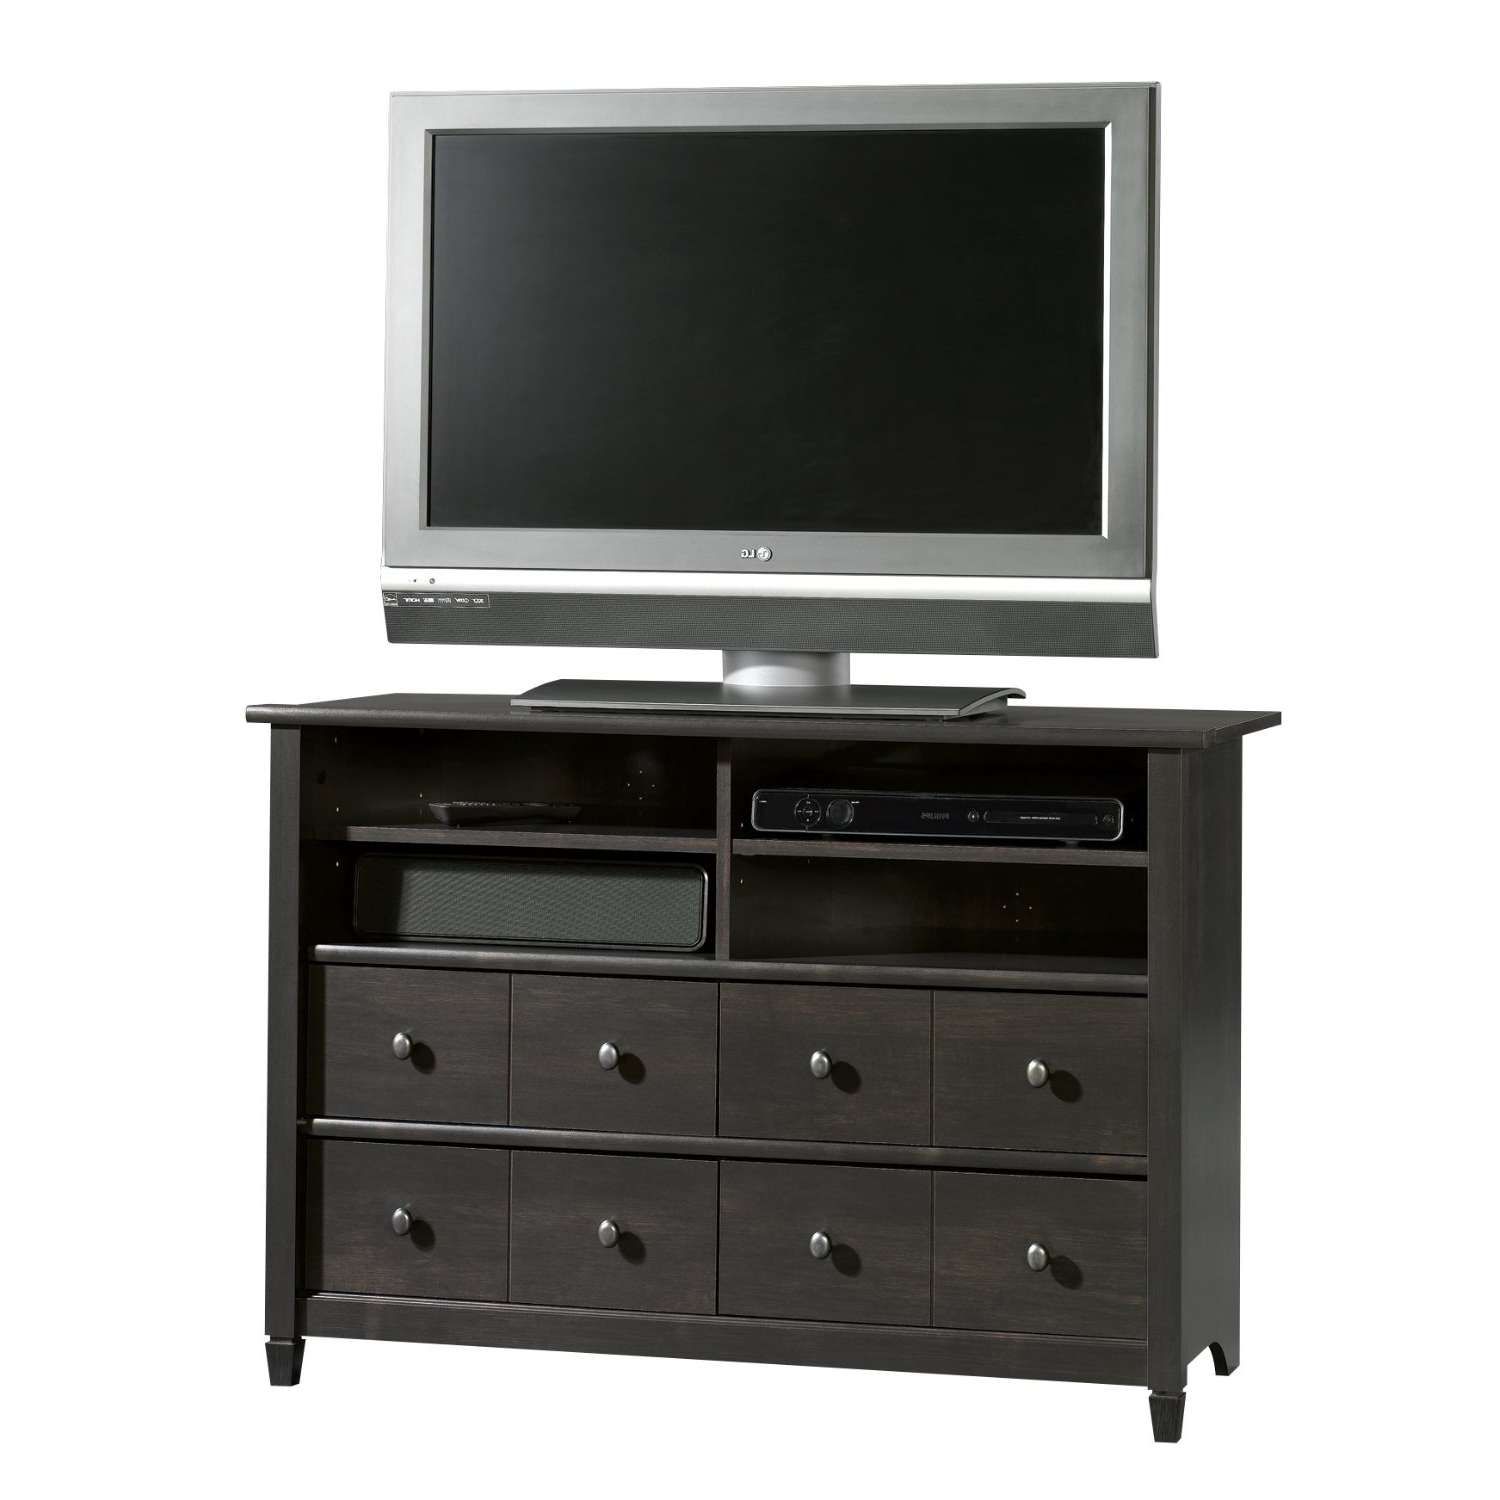 Guide To Black Tv Stand | Studiopsis Throughout Black Tv Cabinets With Drawers (View 10 of 20)